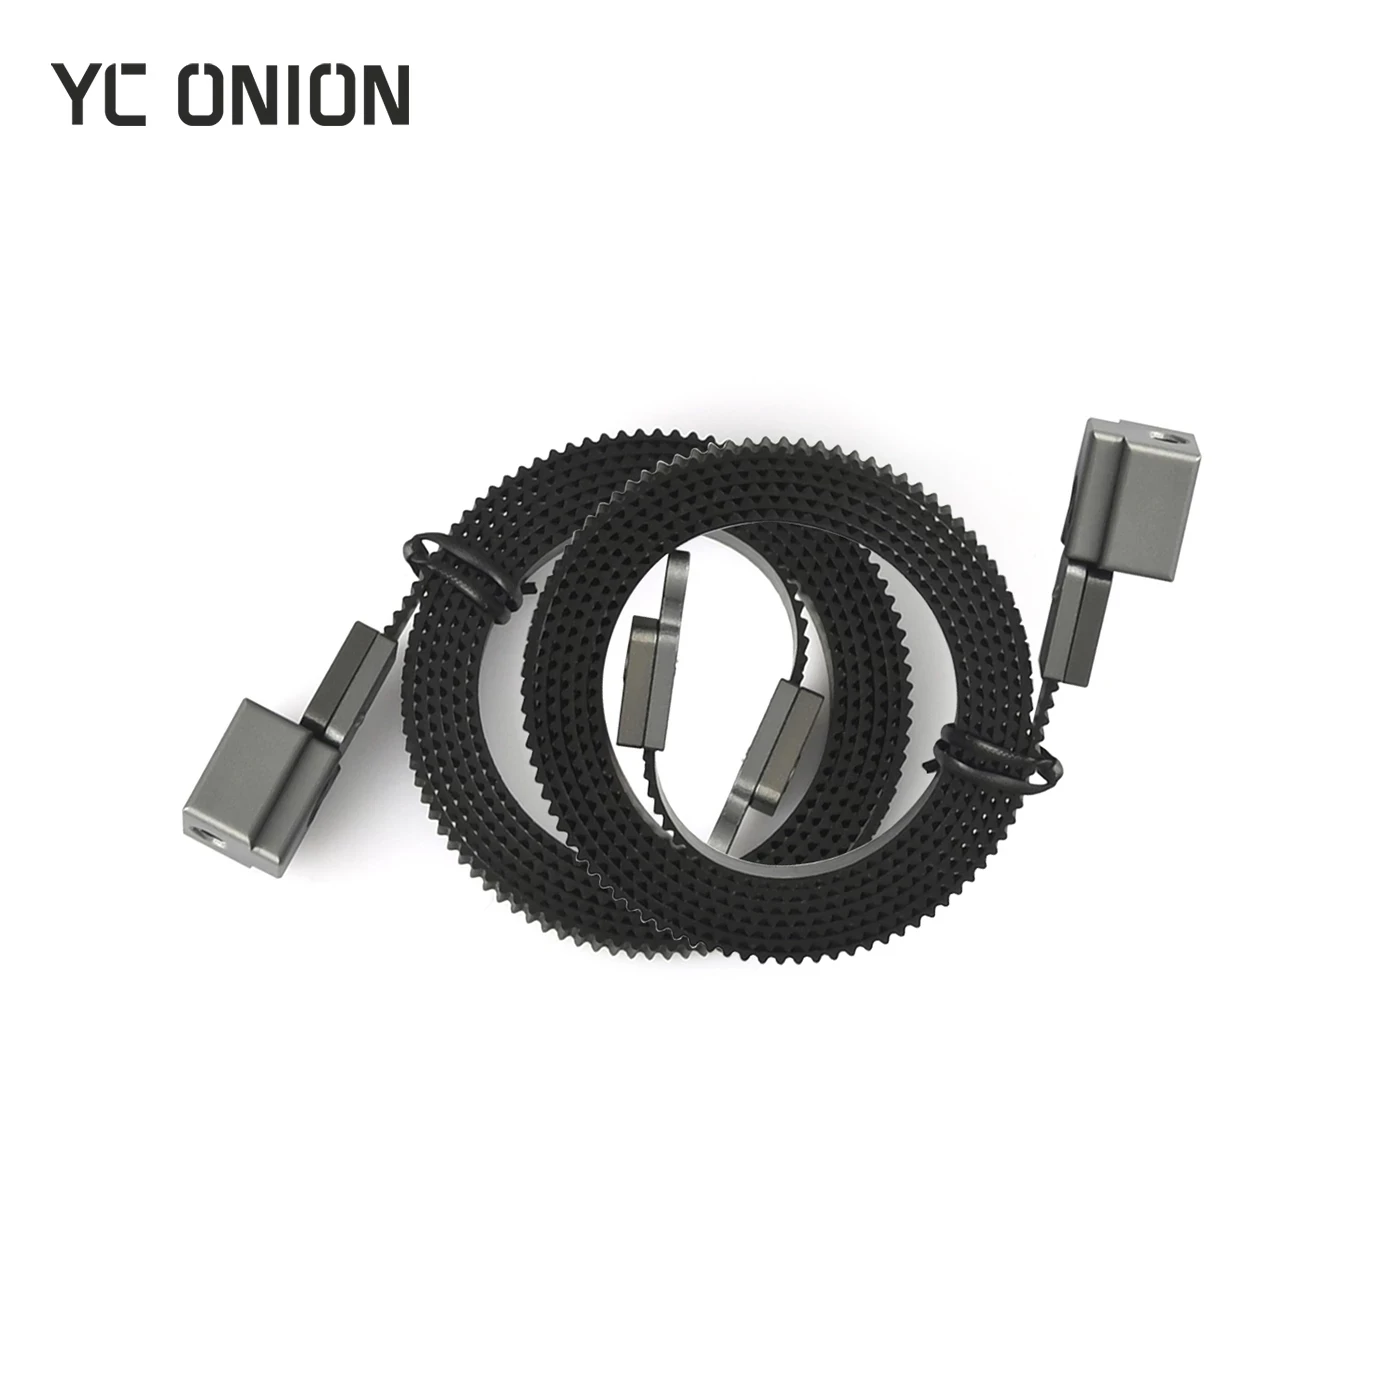 YC Onion Power Supply Base for RS2 Stabilizer in Aluminum Alloy Black